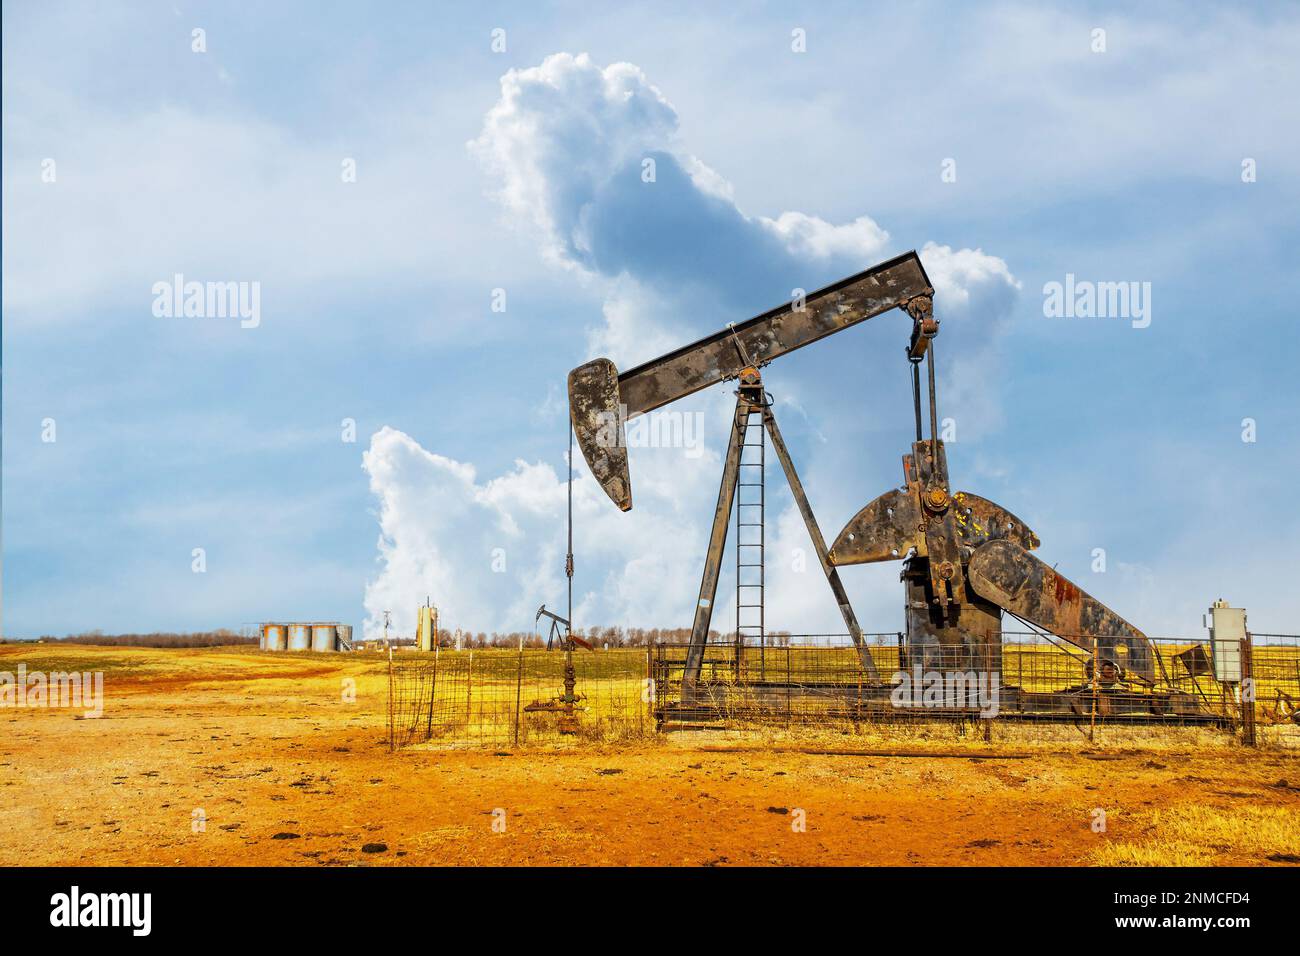 Pump jack oil gas well on red soil with storage tanks on horizon under dramatic sky Stock Photo